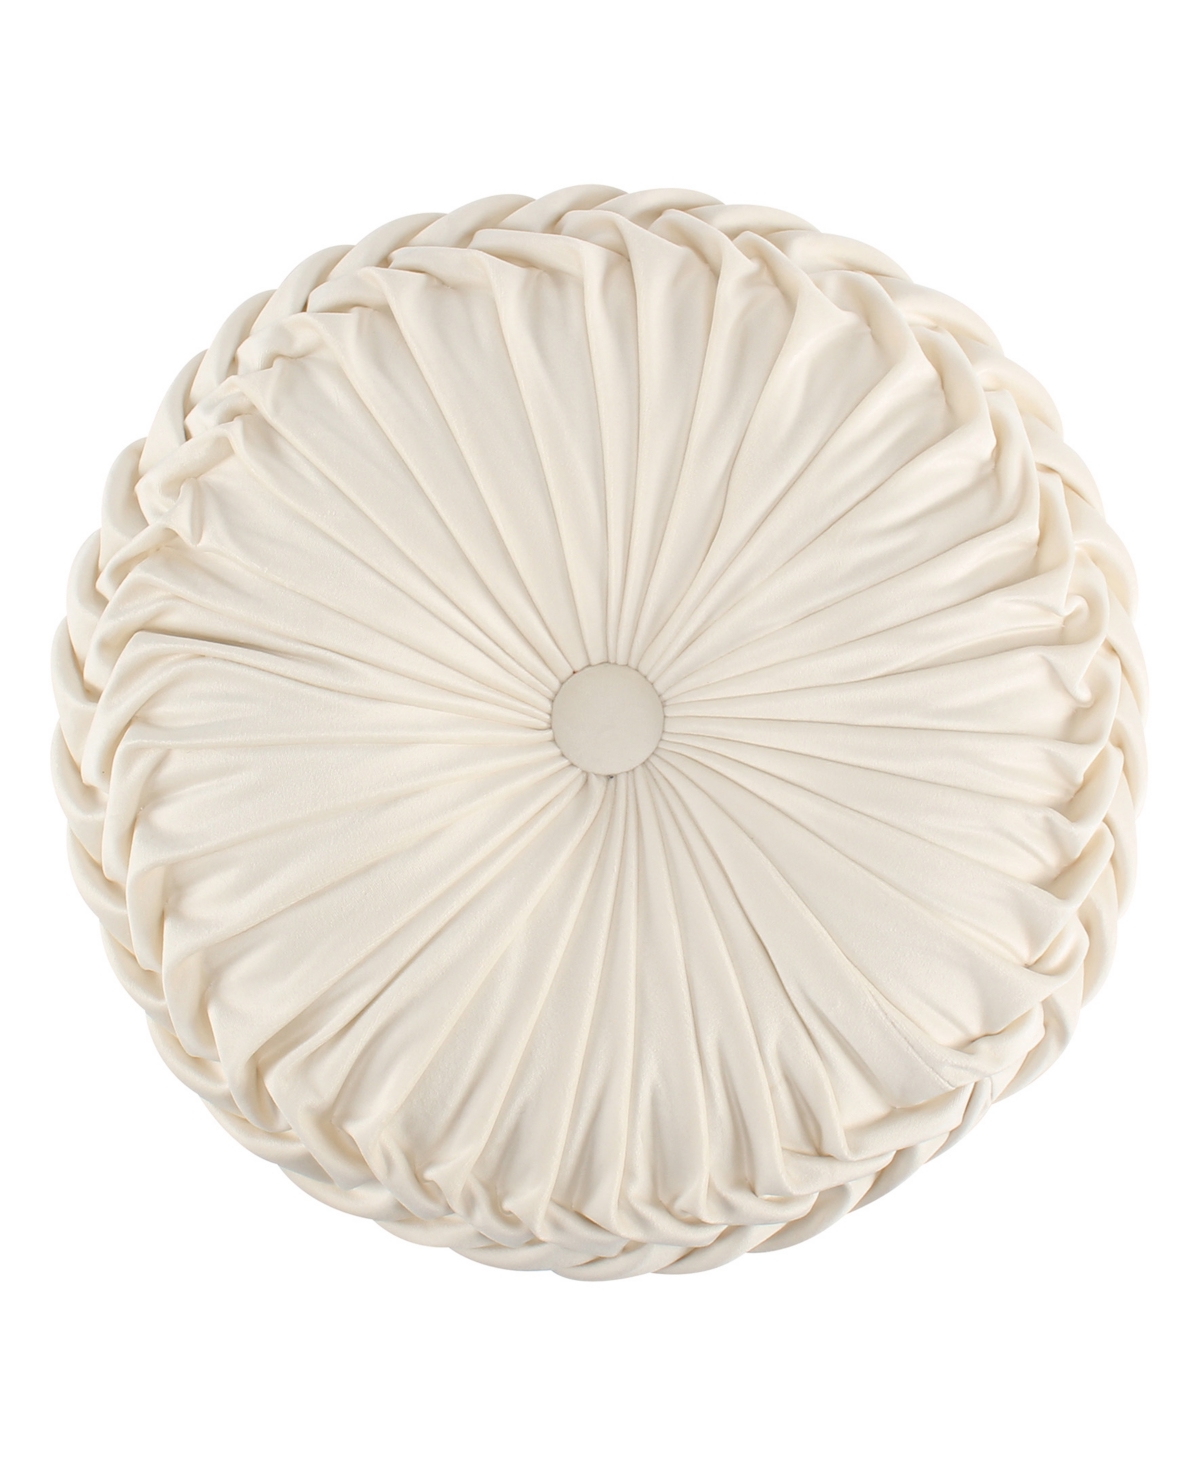 Levtex Emel Pleated Button Tufted Decorative Pillow, 16" Round In Cream